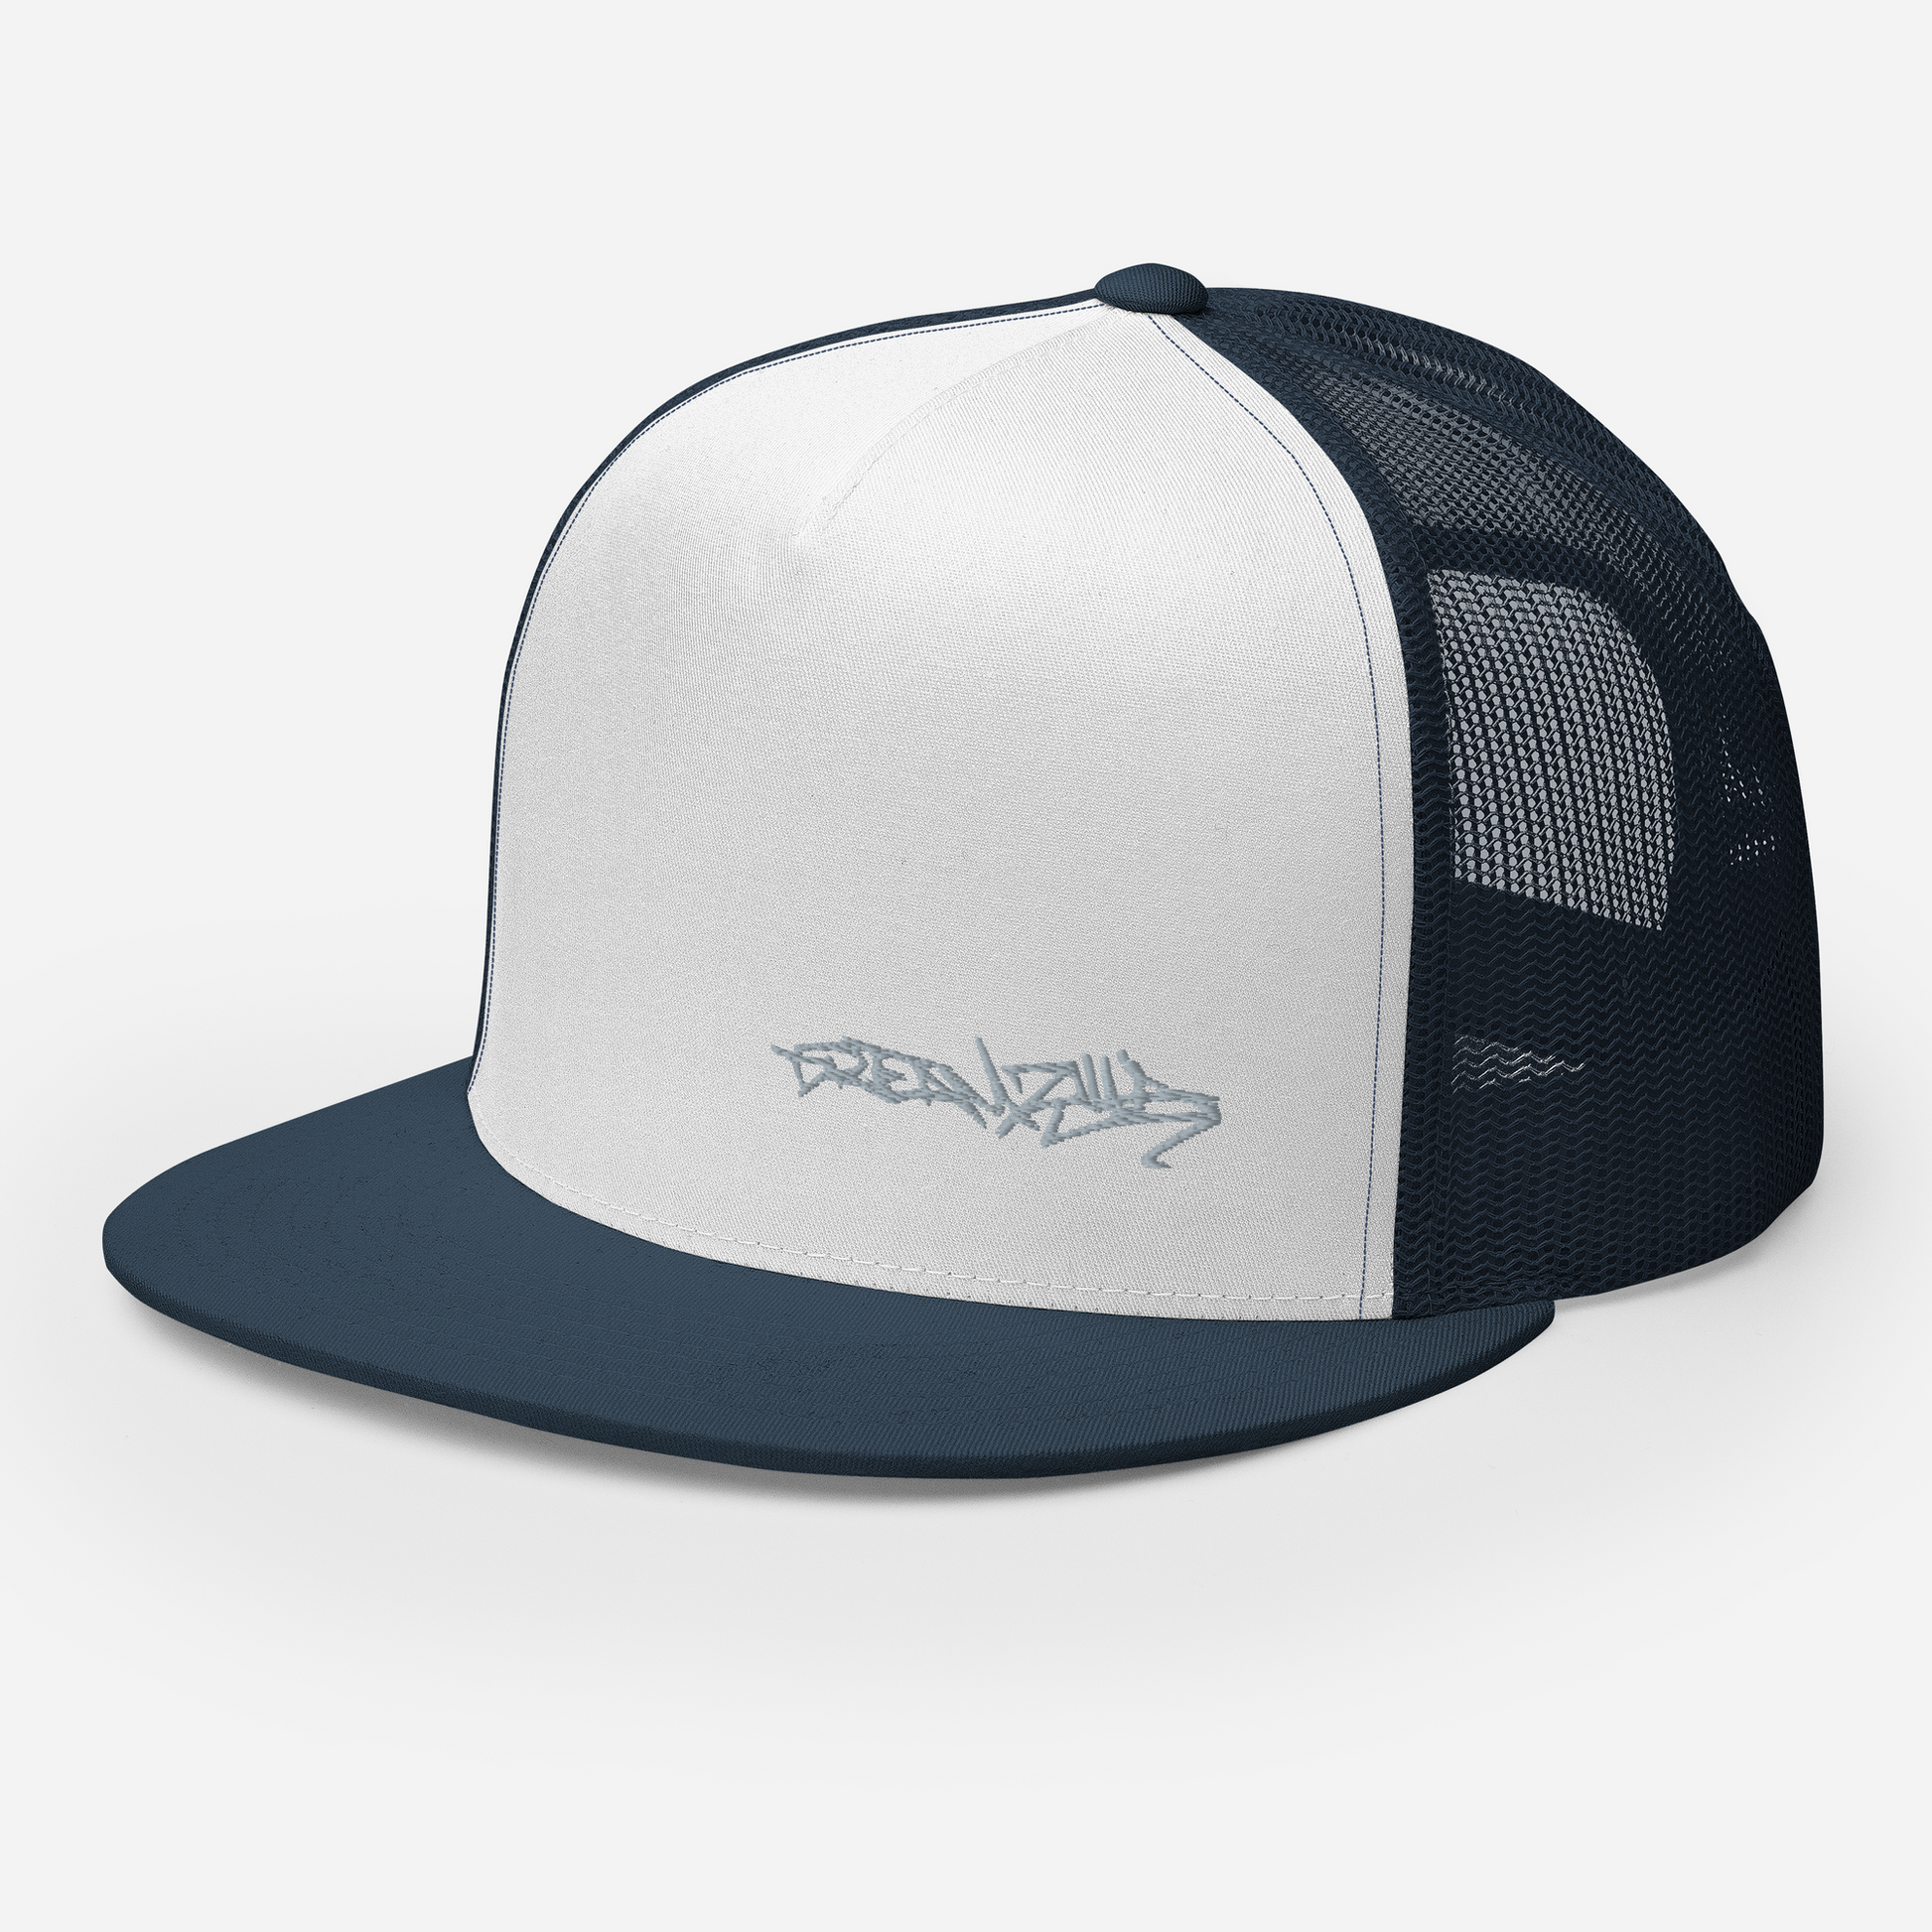 Angled Front Left of Graffiti Tag Trucker Cap in White with Navy Brim and Back